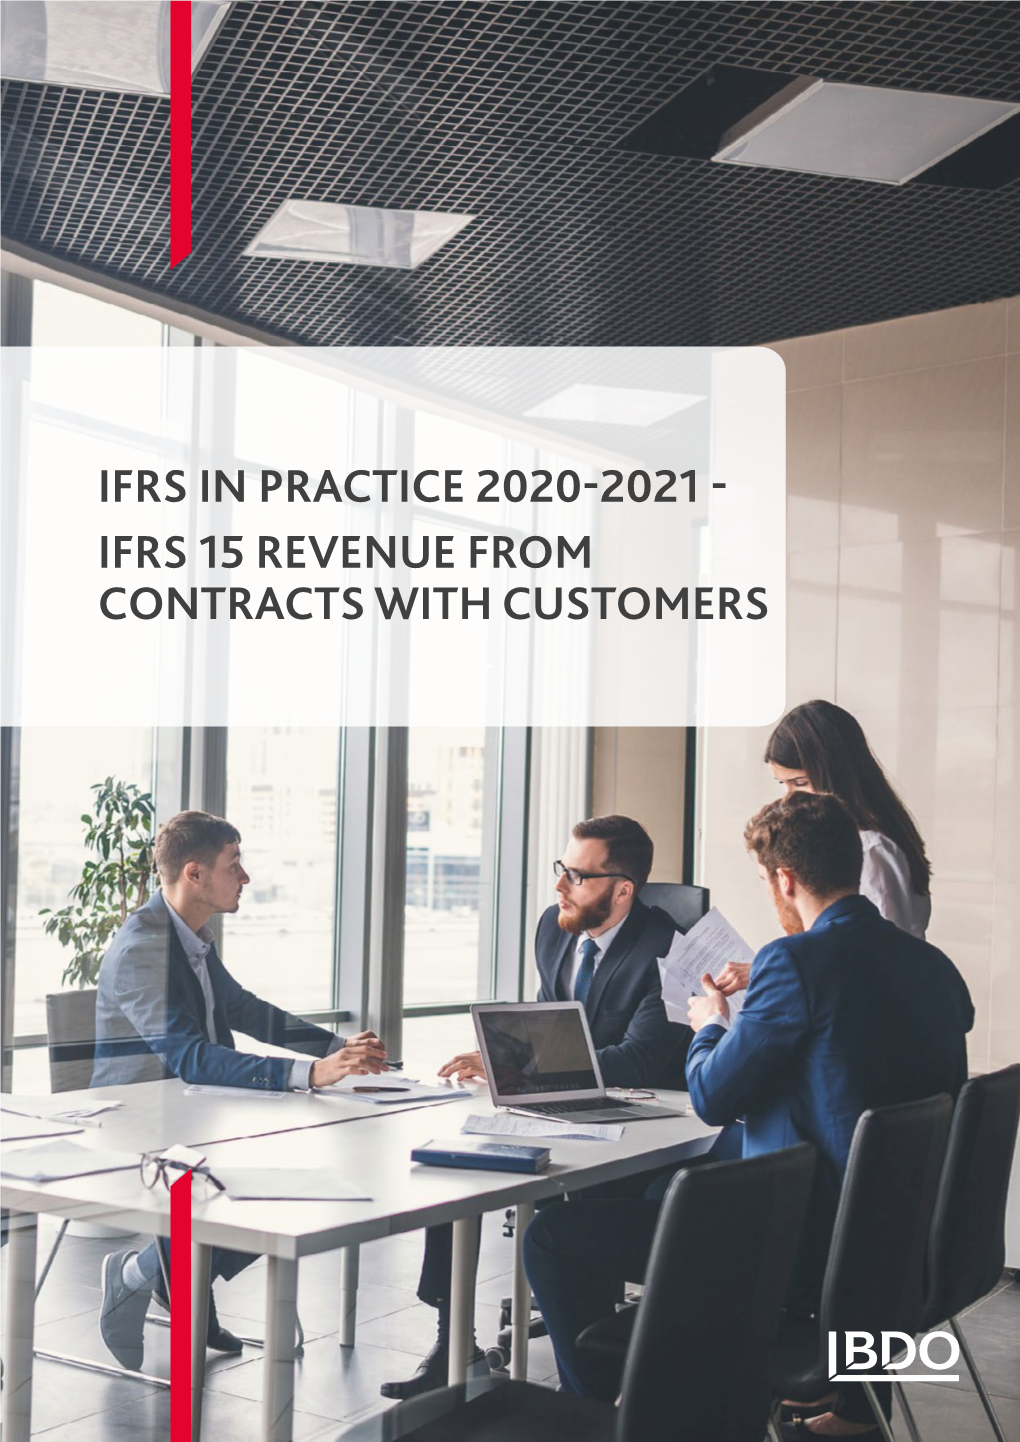 IFRS in PRACTICE 2020-2021 - IFRS 15 REVENUE from CONTRACTS with CUSTOMERS IFRS in Practice 2020-2021 - IFRS 15 Revenue from Contracts with Customers 2